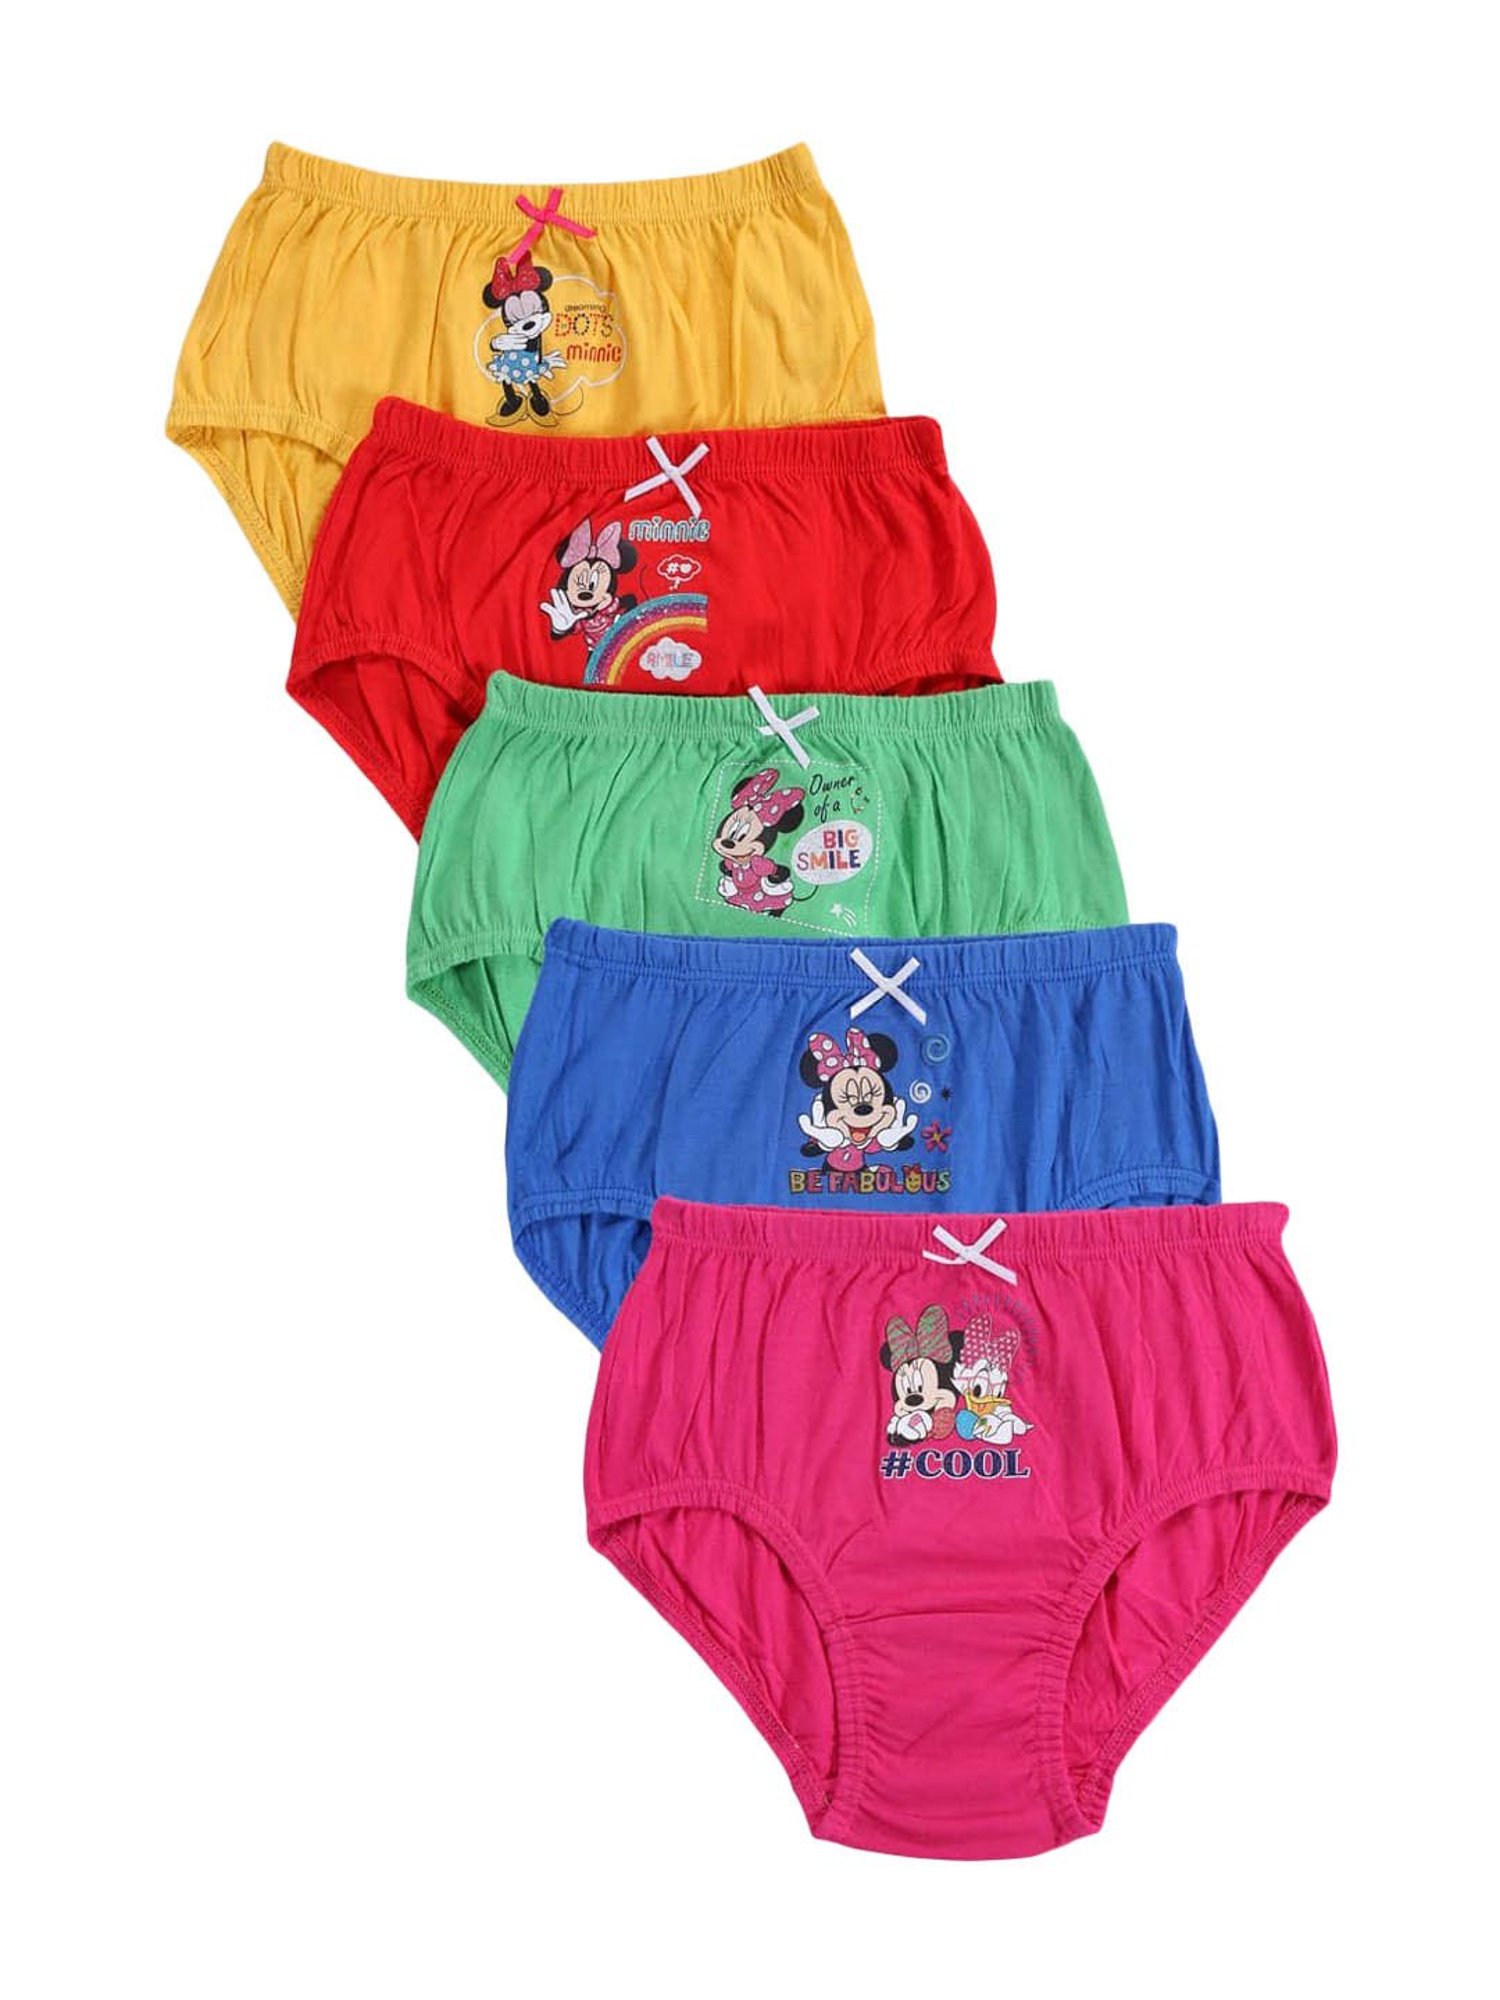 Buy Bodycare Kids Multicolor Printed Panties - Pack of 5 for Girls Clothing  Online @ Tata CLiQ